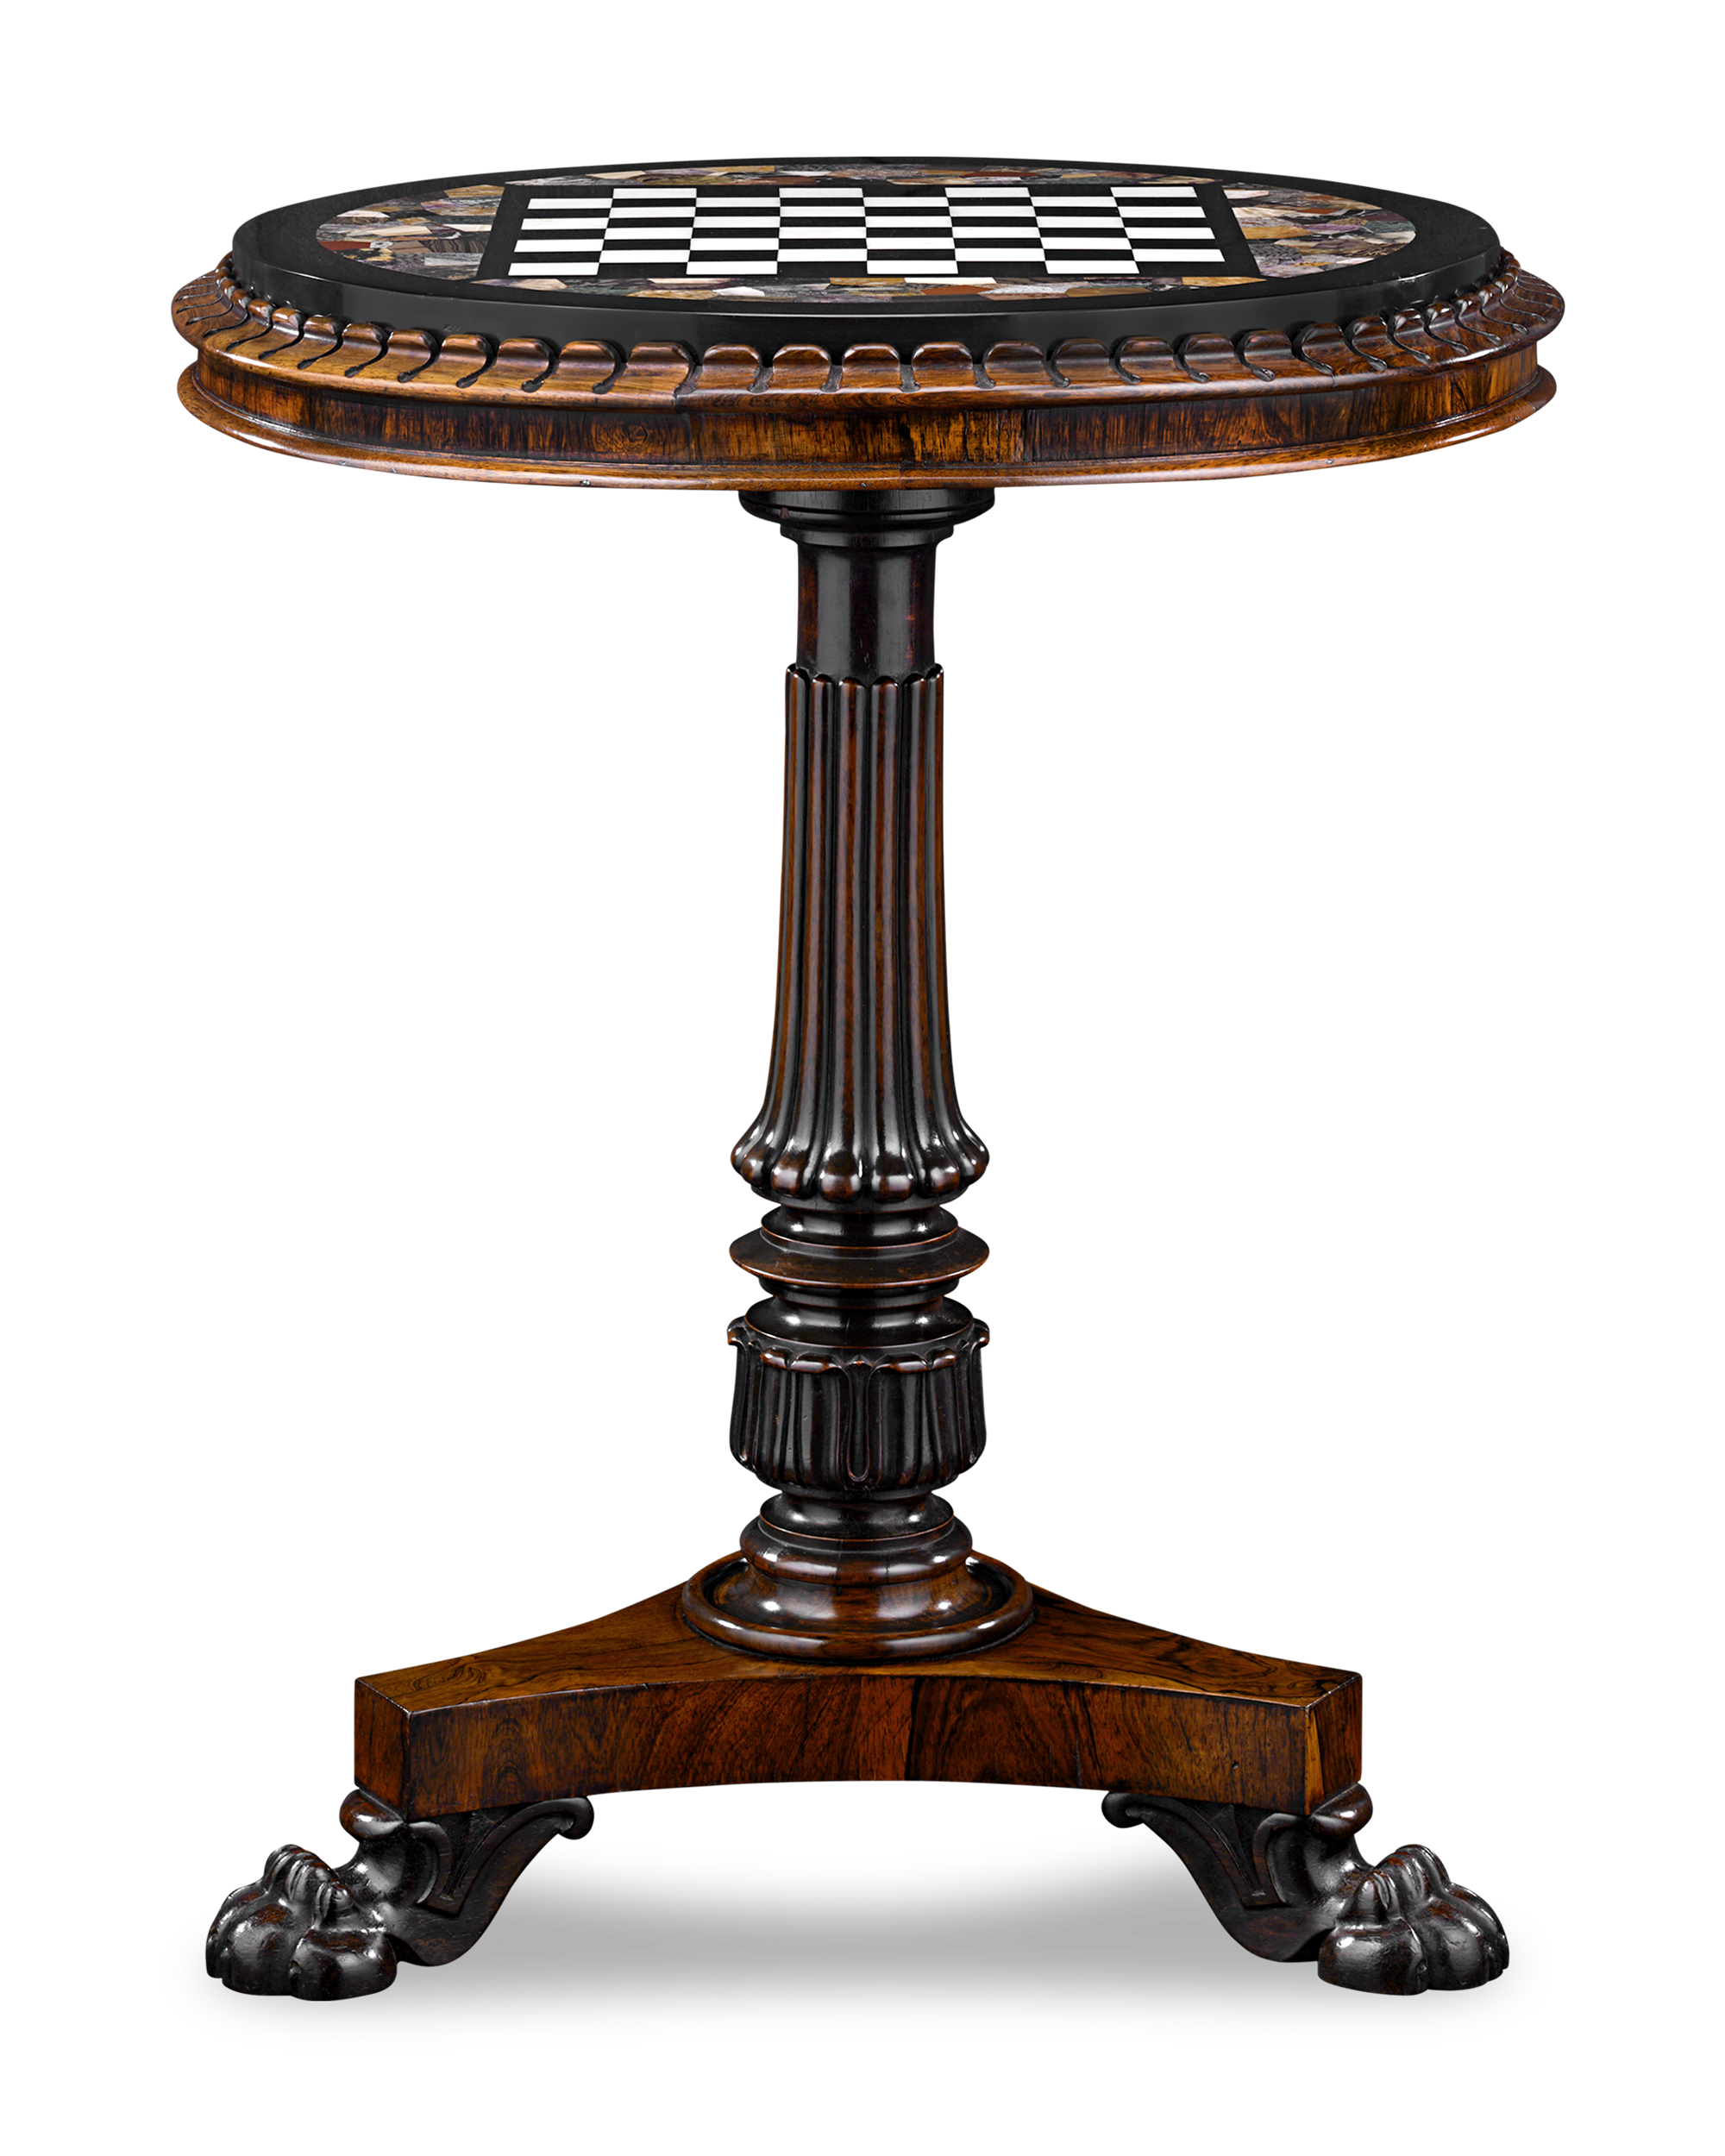 Specimen Games Table Attributed to Gillows